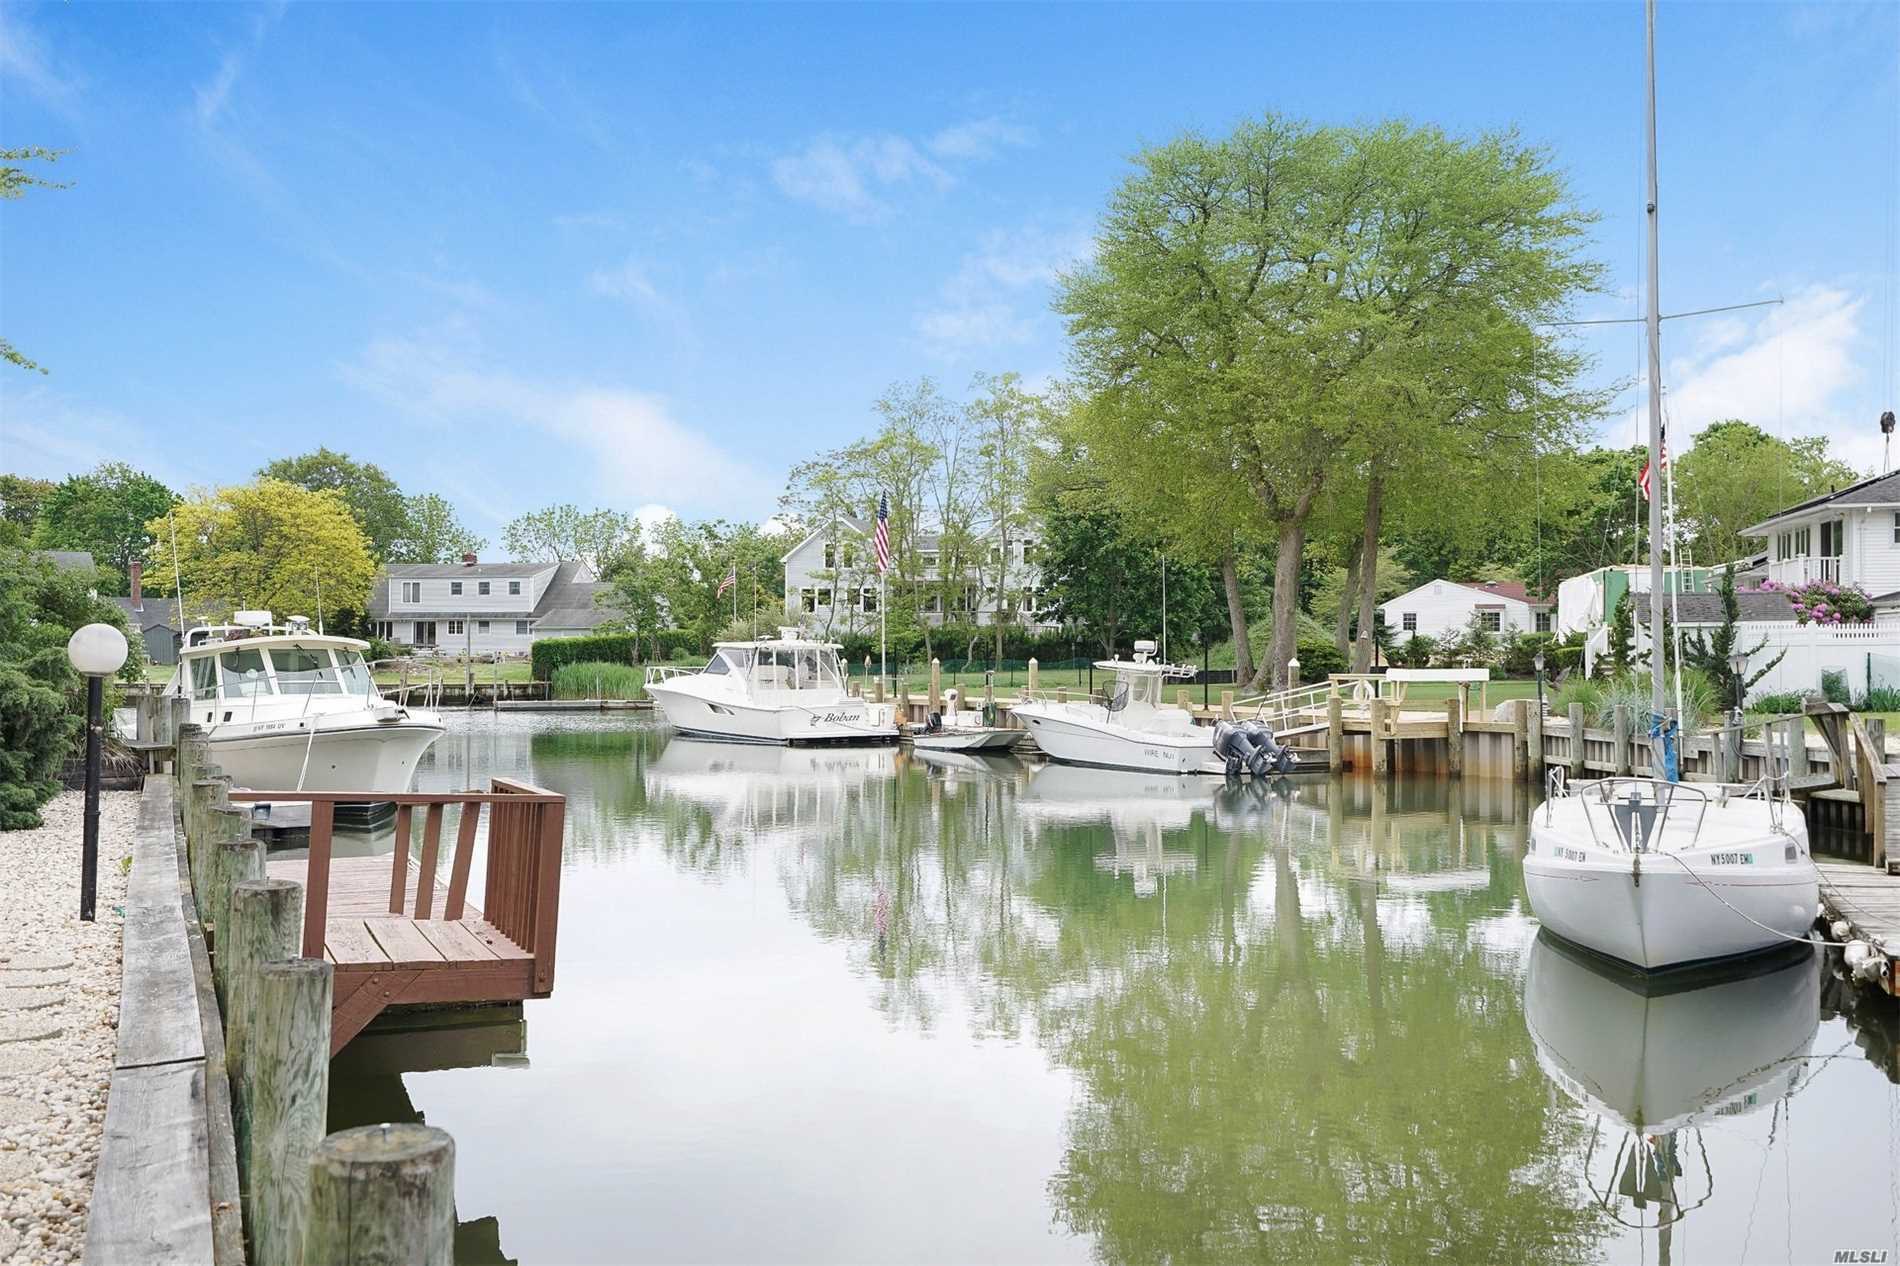 Price Reduced! Solid, Spacious Waterfront Home With Deep Water Dock! Vaulted Ceiling. Open Floor Plan. Central Air Conditioning.  Bulkhead. Floating Dock. 2 Minutes To Bay. Quiet Cul De Sac. Community Bay Beach. 3 Blocks To Winery. 3 Bedrooms/3 Full Baths.